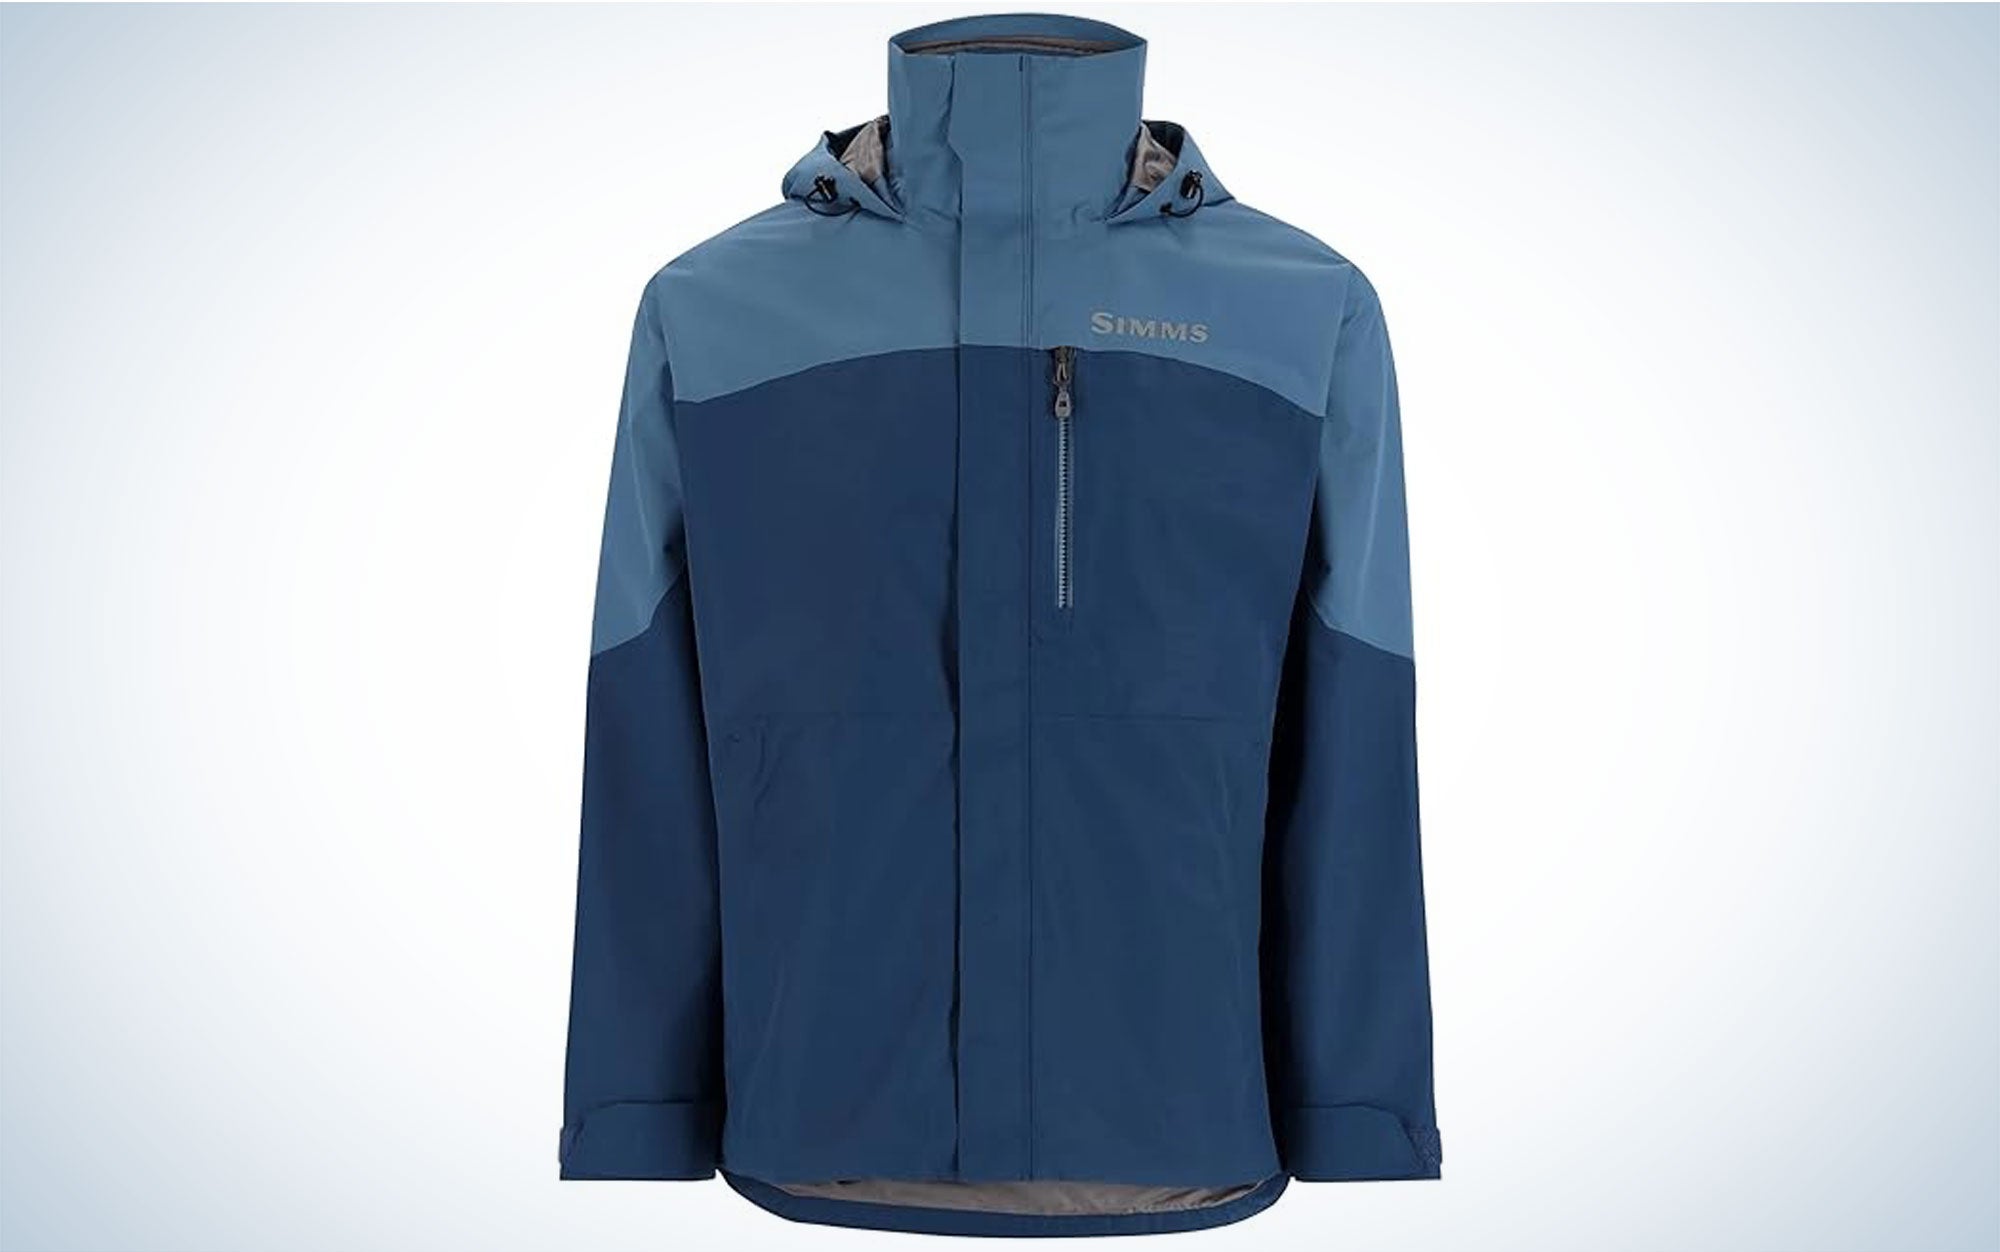 We tested the Simms Challenger fishing jacket.